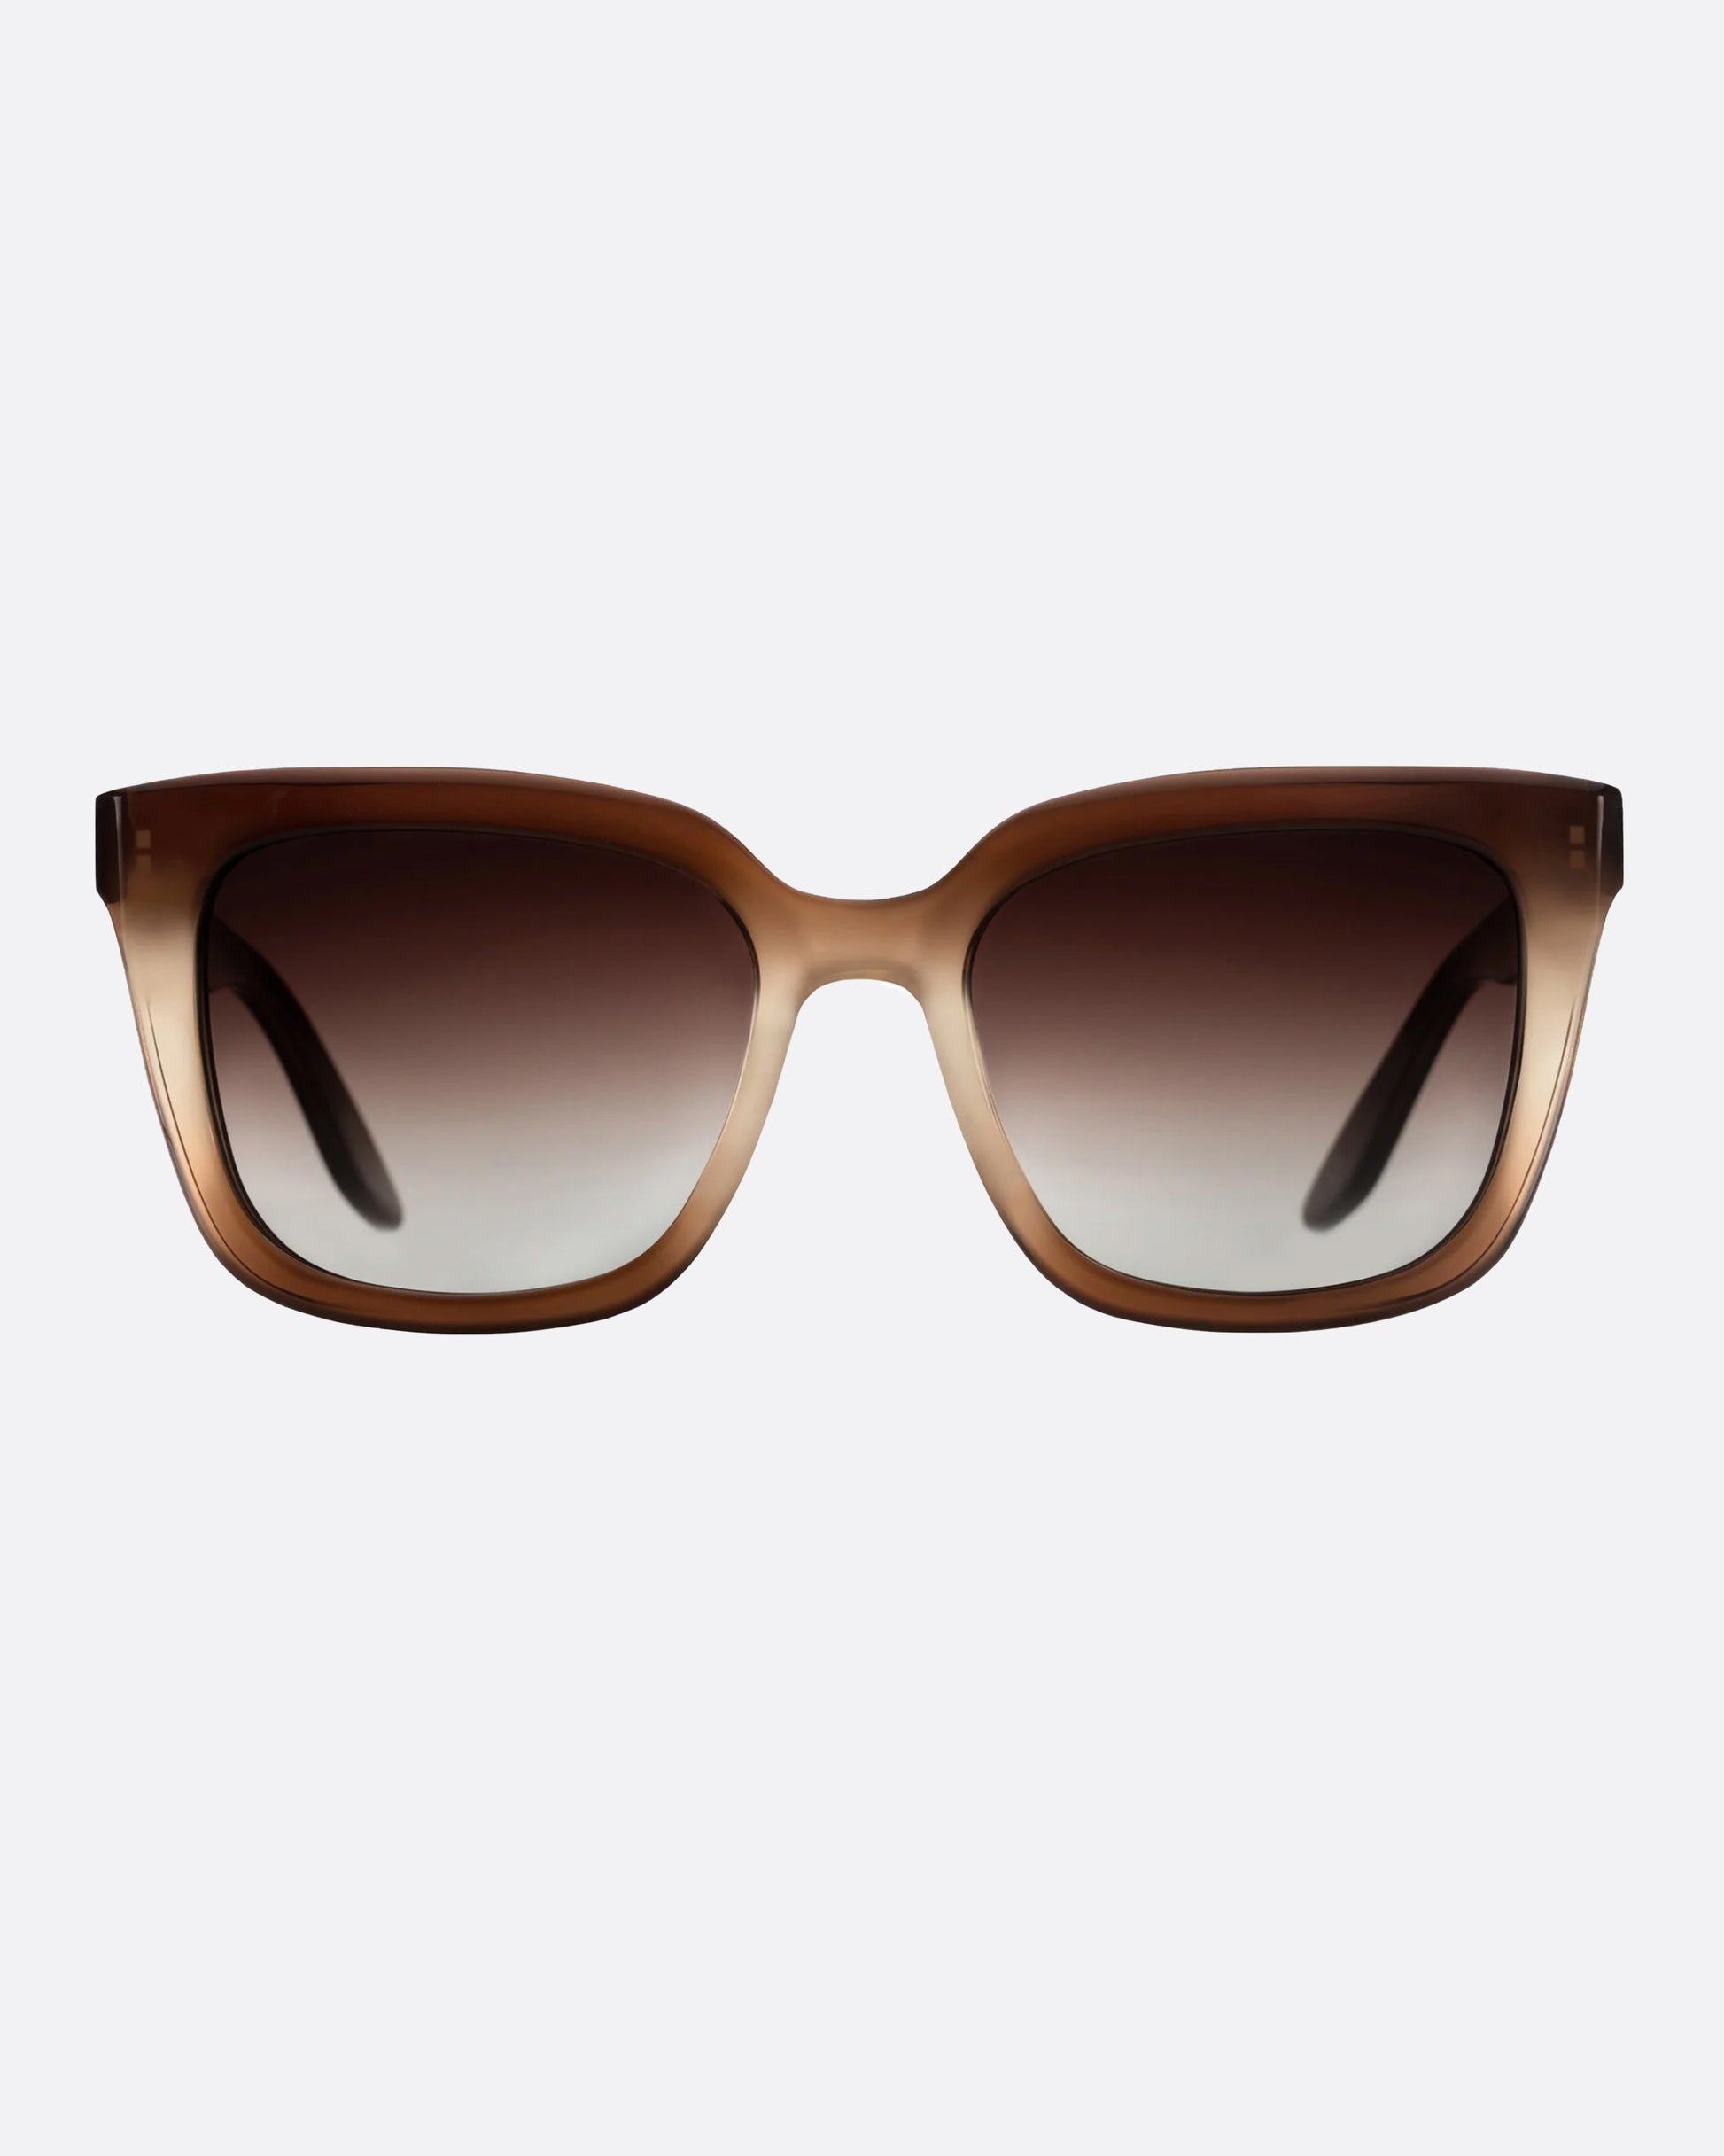 A universally flattering style, designed to fit almost every face. This time in a brown gradient.